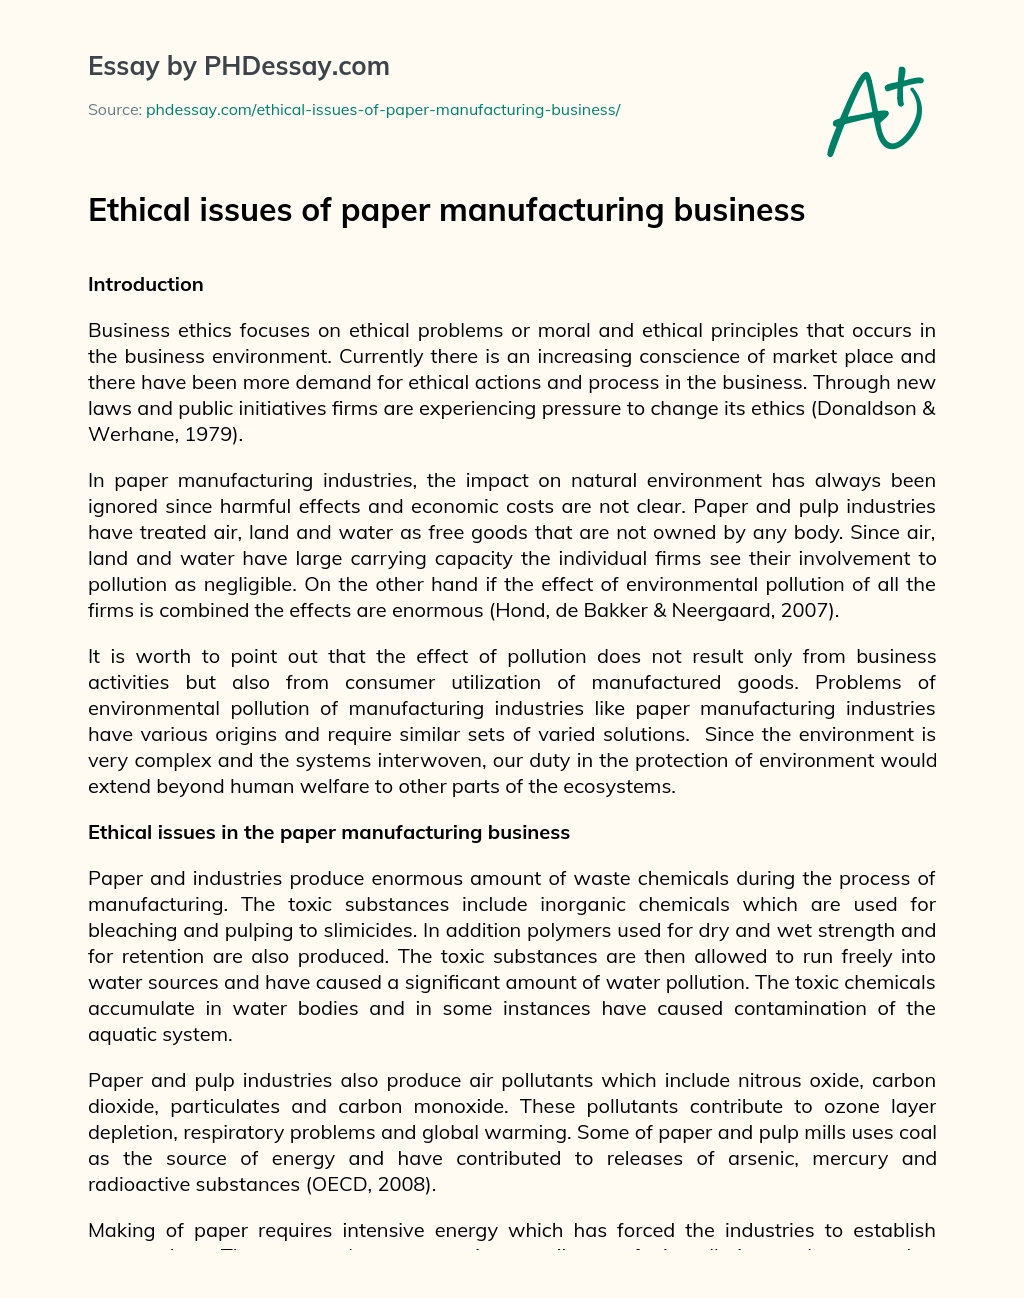 Ethical Issues of Paper Manufacturing Business essay